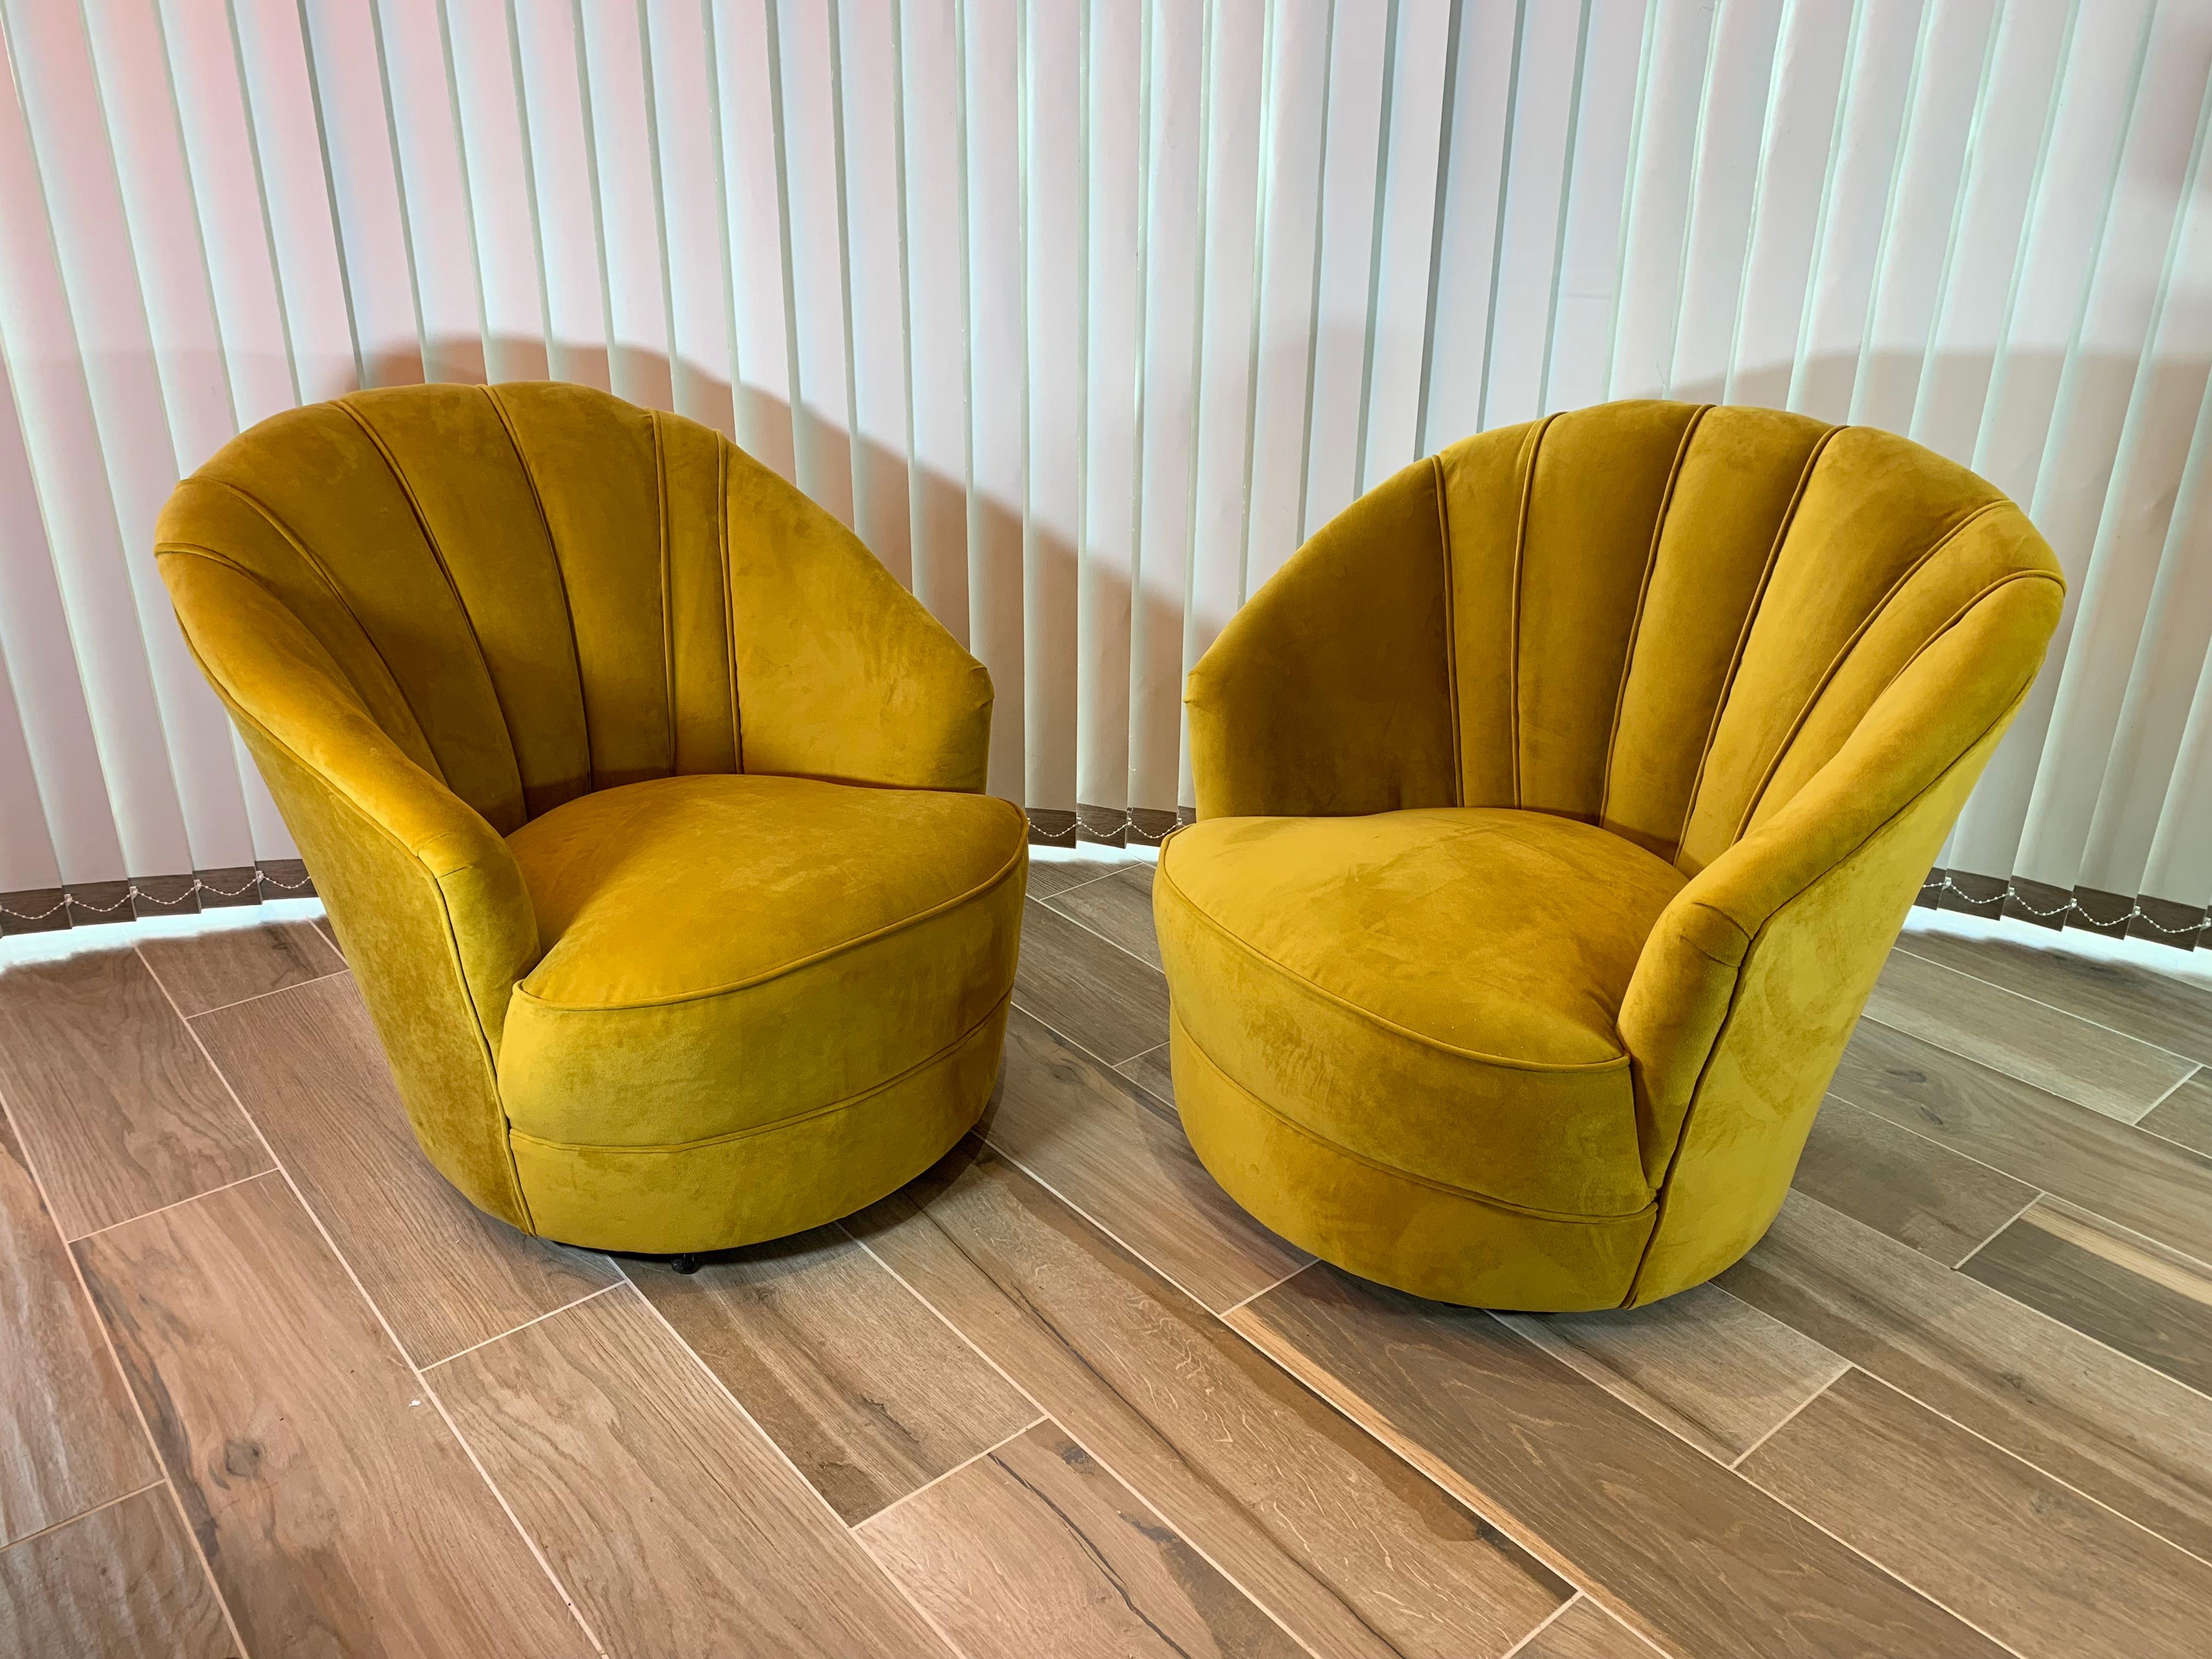 A pair of Art Deco cocktail chairs, with their original sprung seats have just been reupholstered in a soft gold velvet, so in excellent condition.

Each chair has its original castors.

Height of seat 40 cm

Dimensions:
Height 76 cm 
Width